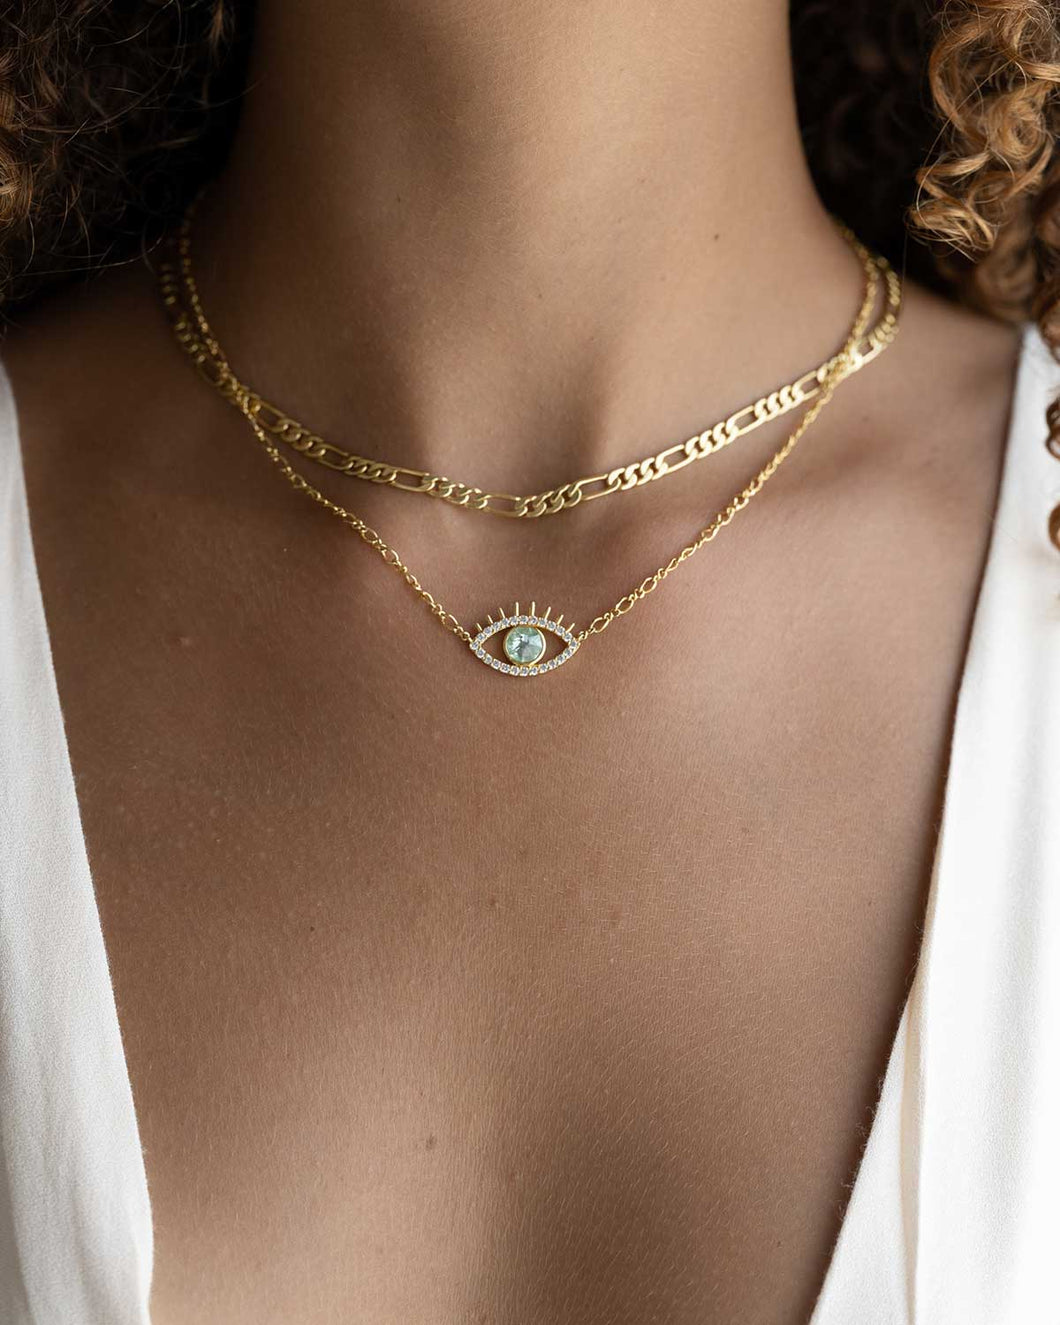 Stunning evil eye gold necklace with green-eyed charm and zirconia crystals in clear and mint green hues.